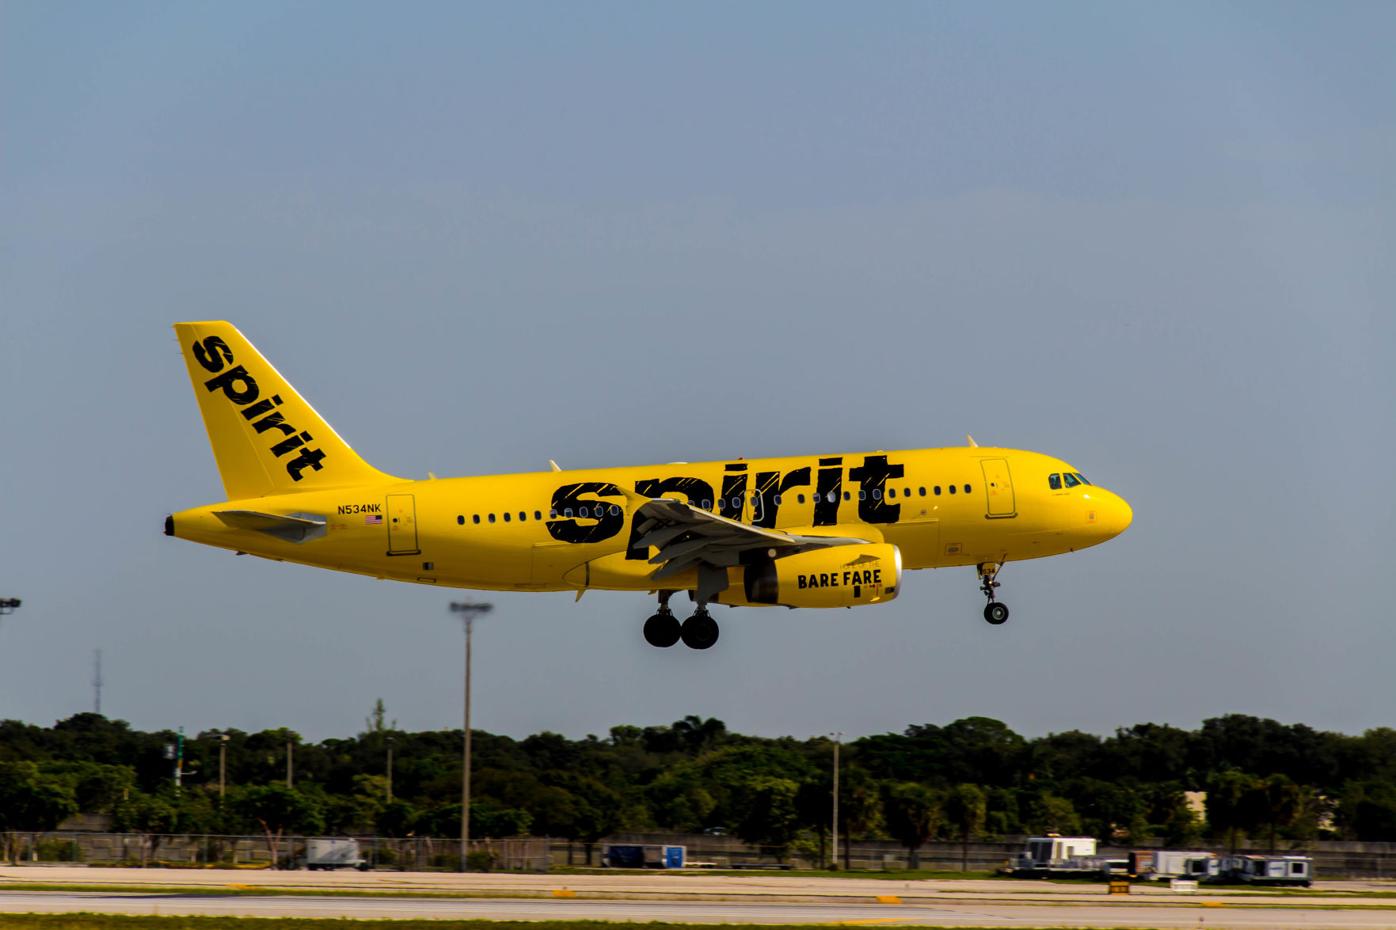 Spirit of Louisiana Takes Flight at Louis Armstrong New Orleans International  Airport